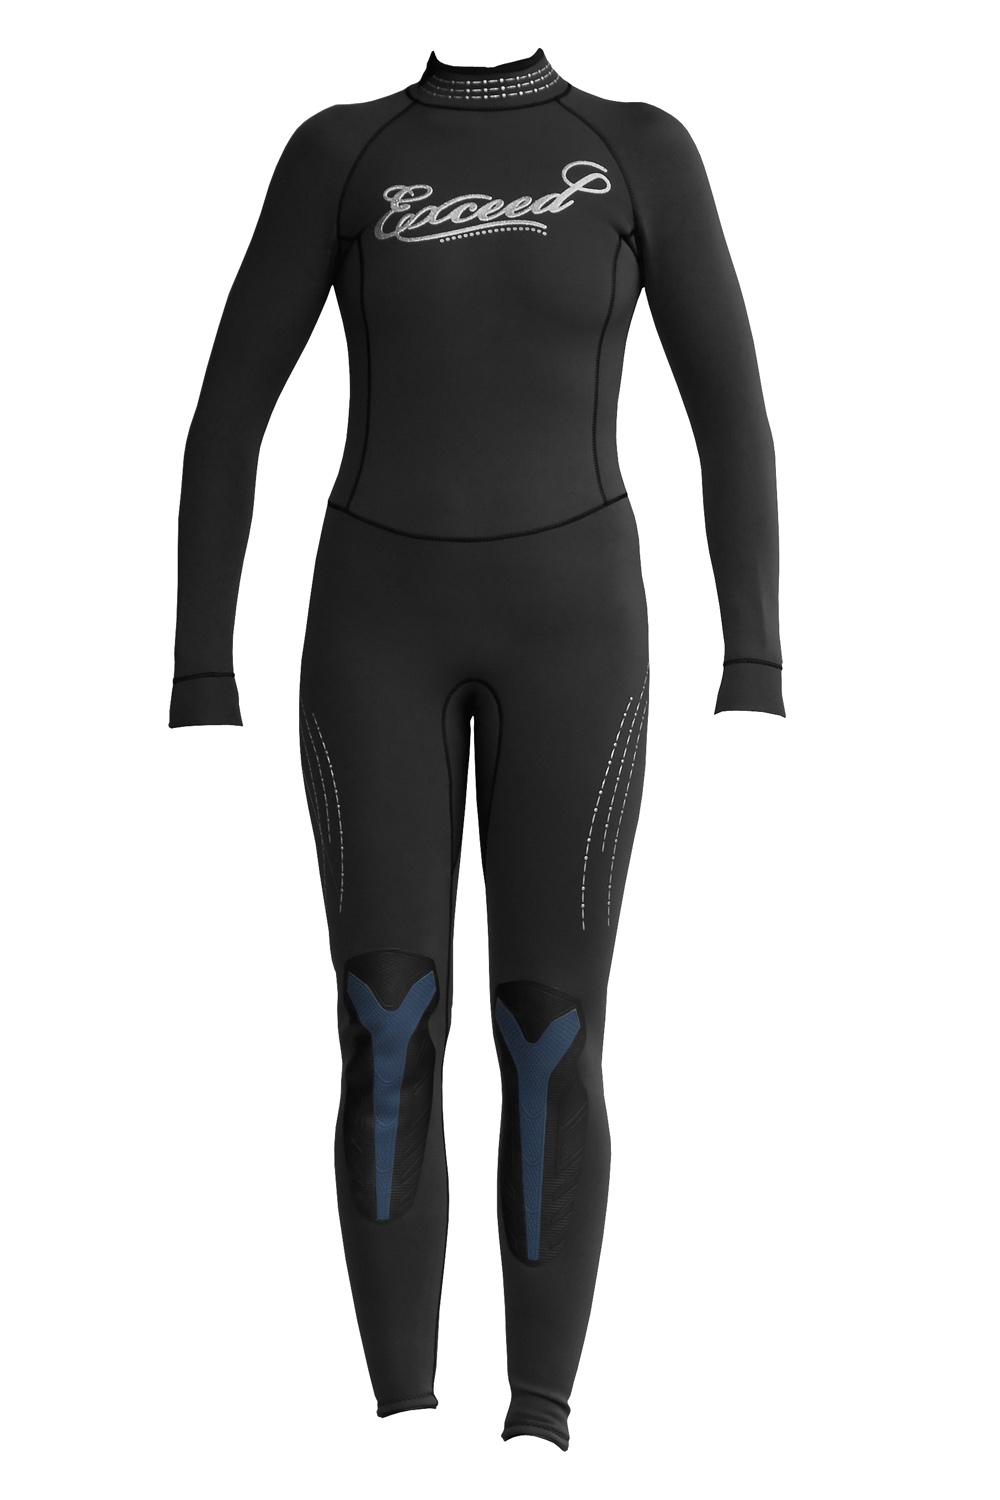 Exceed Eccentric Womens 3/2mm Full Wetsuit